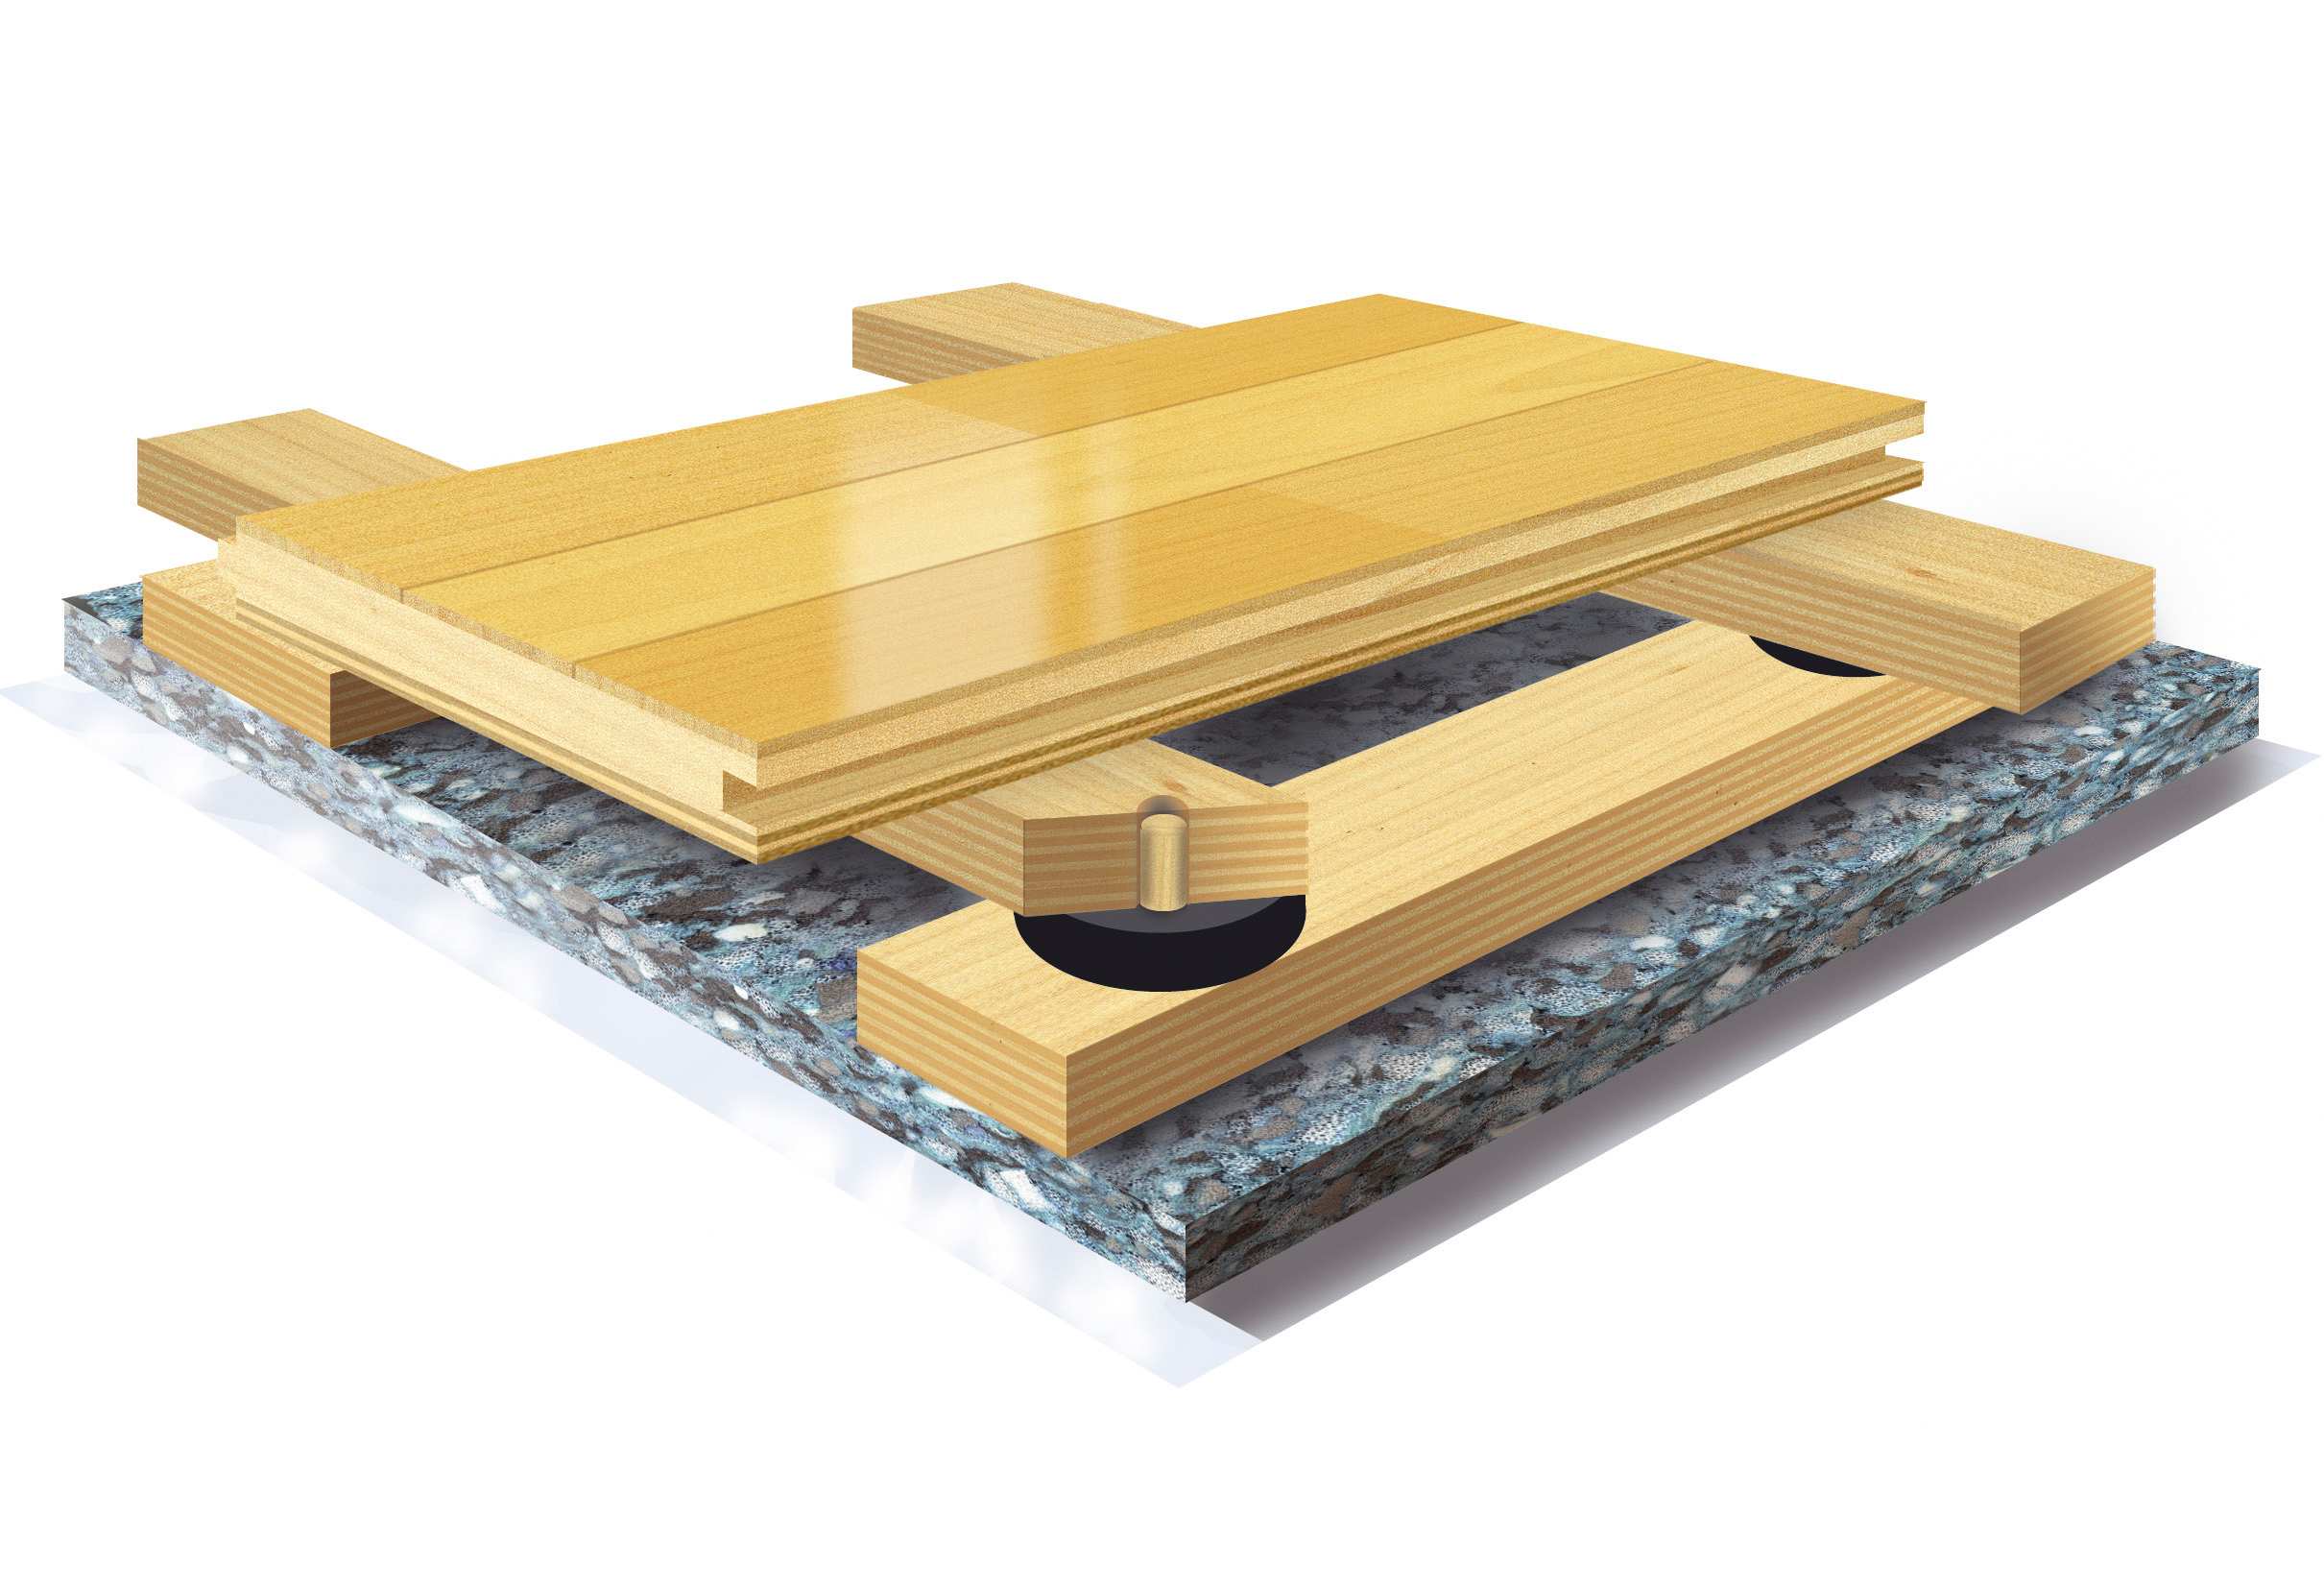 Module fixed to double battens with pins through a 10 mm thick elastomer pad, double battens grid crossed every 280 mm. 22 mm multilayer floor surface preassembled in a press.